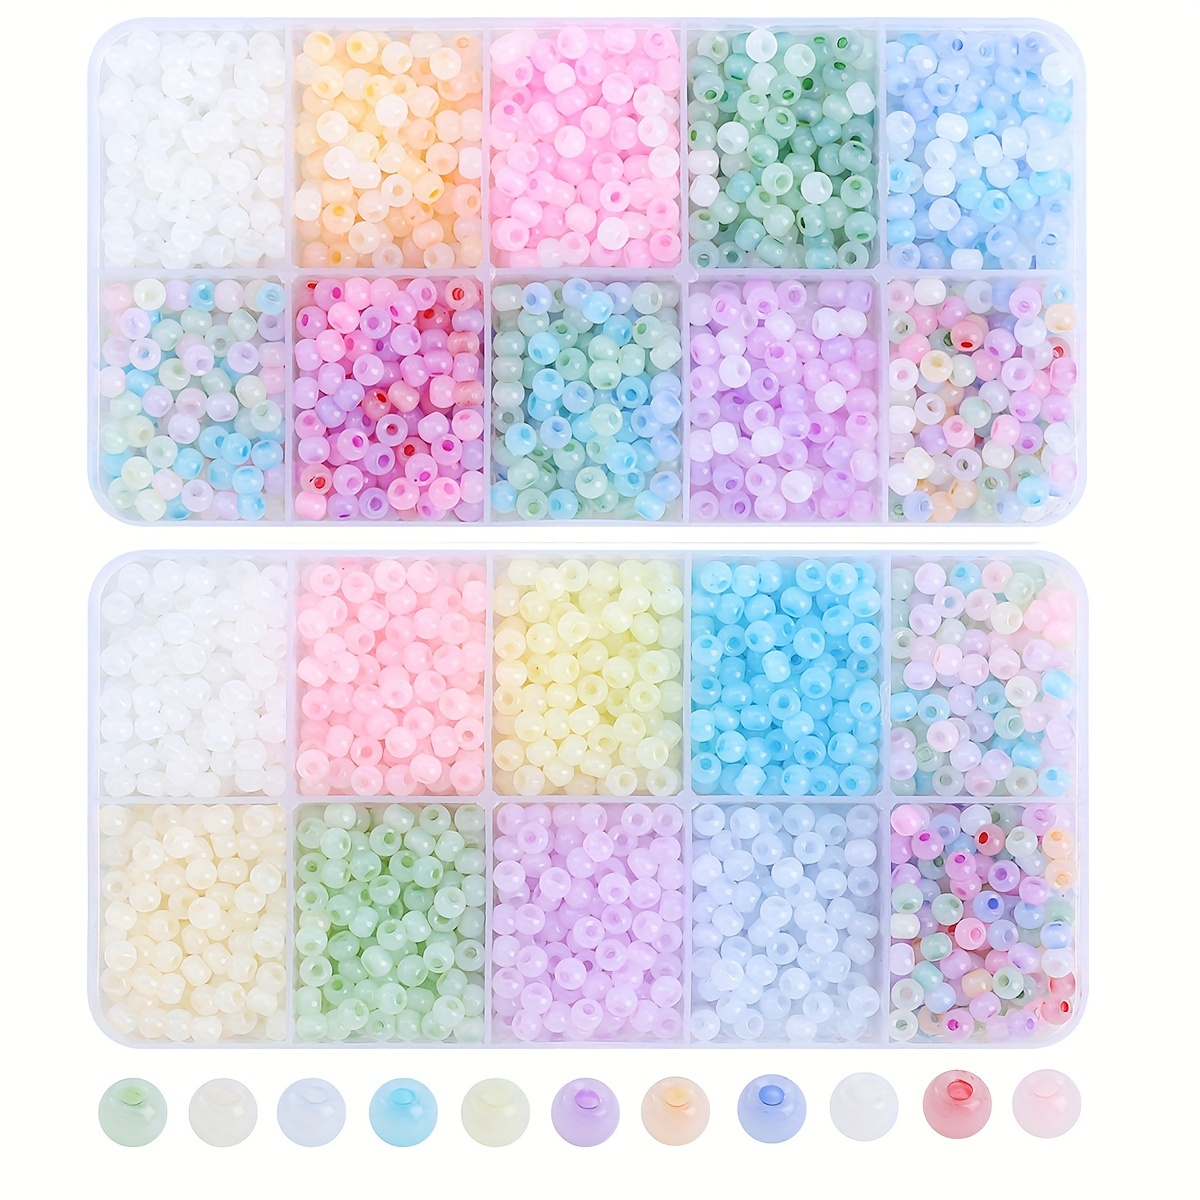 

1500pcs 4mm Cat Eye Jade Glass Seed Beads - 10-grid Assortment For Diy Jewelry Making, Bracelets, Necklaces, Earrings - Ideal Craft Gift For Mothers